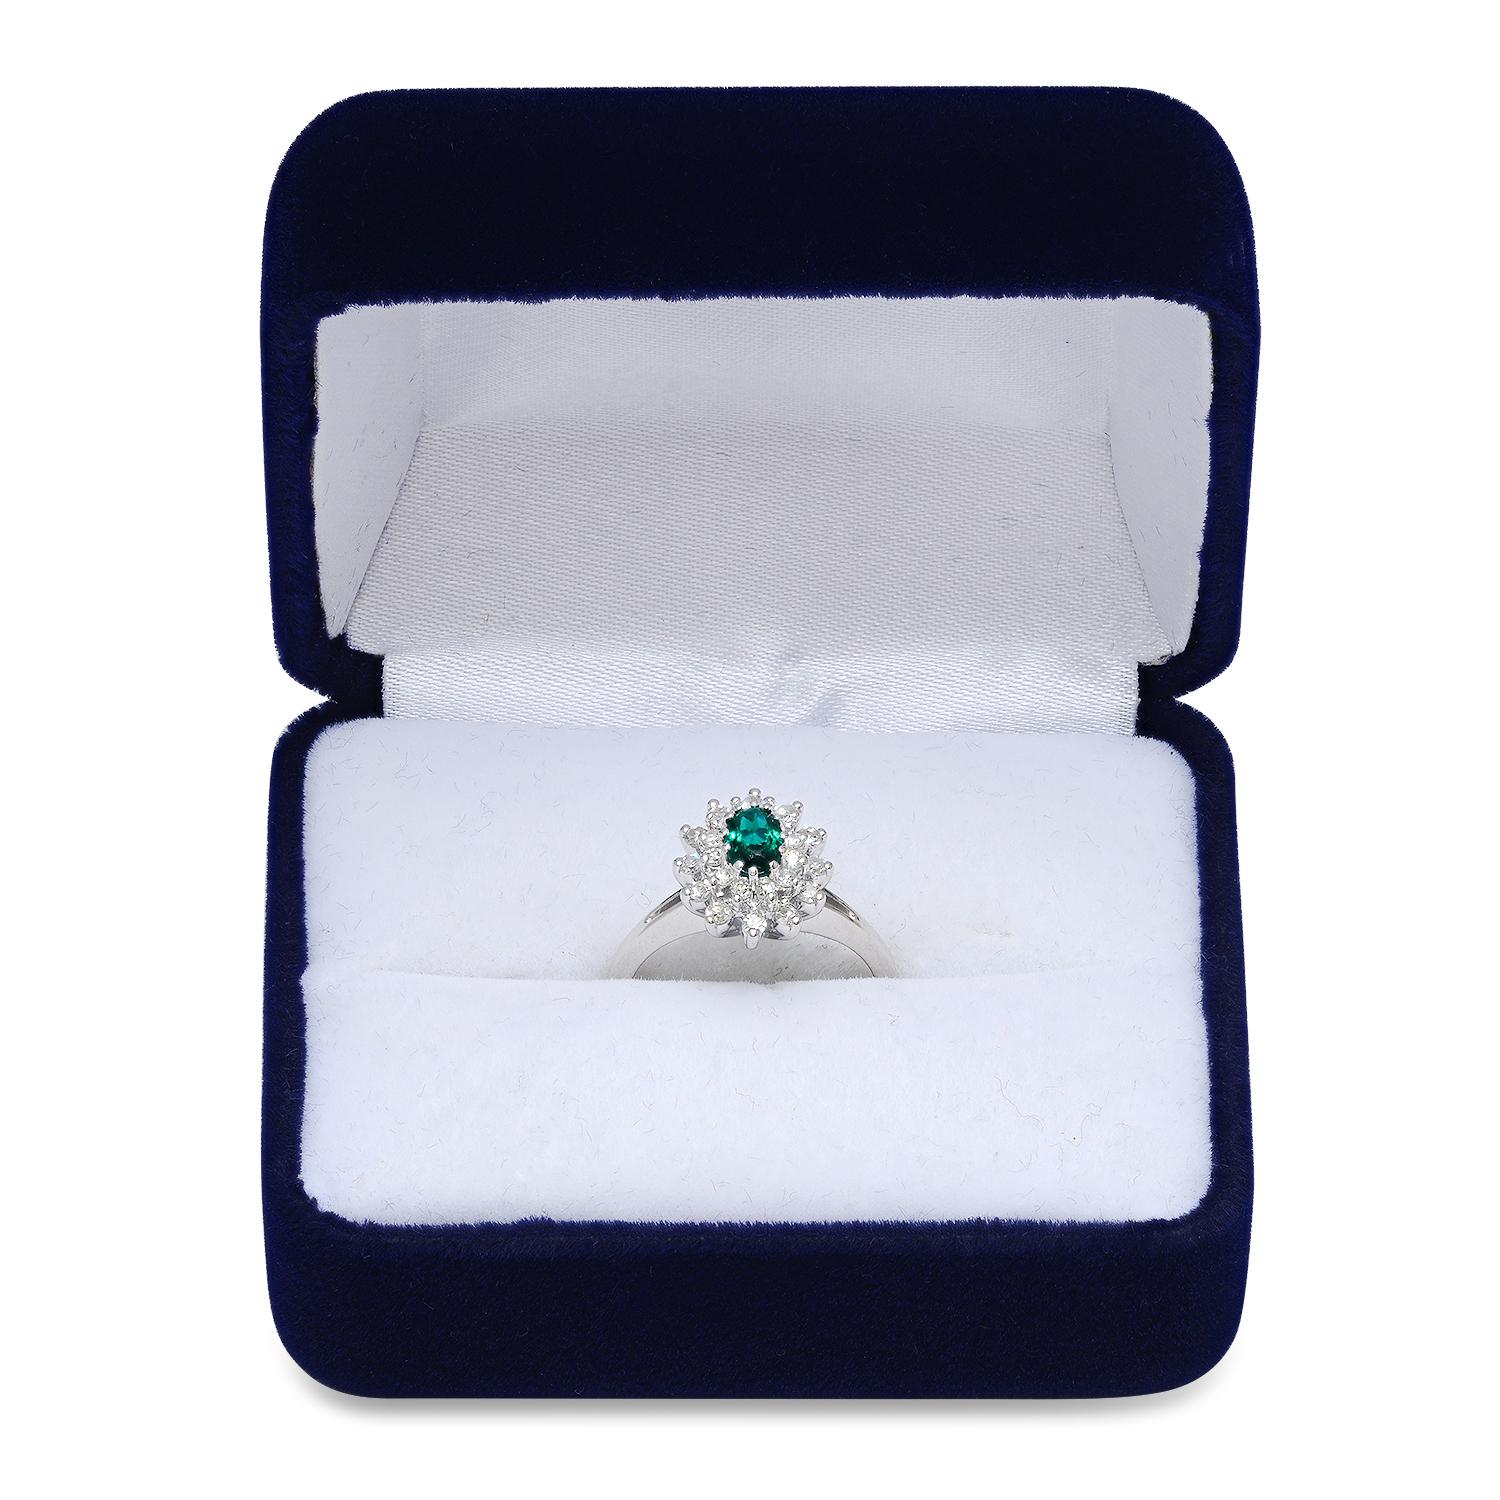 14K White Gold Setting with 0.50ct Emerald and 0.40ct Diamond Ladies Ring